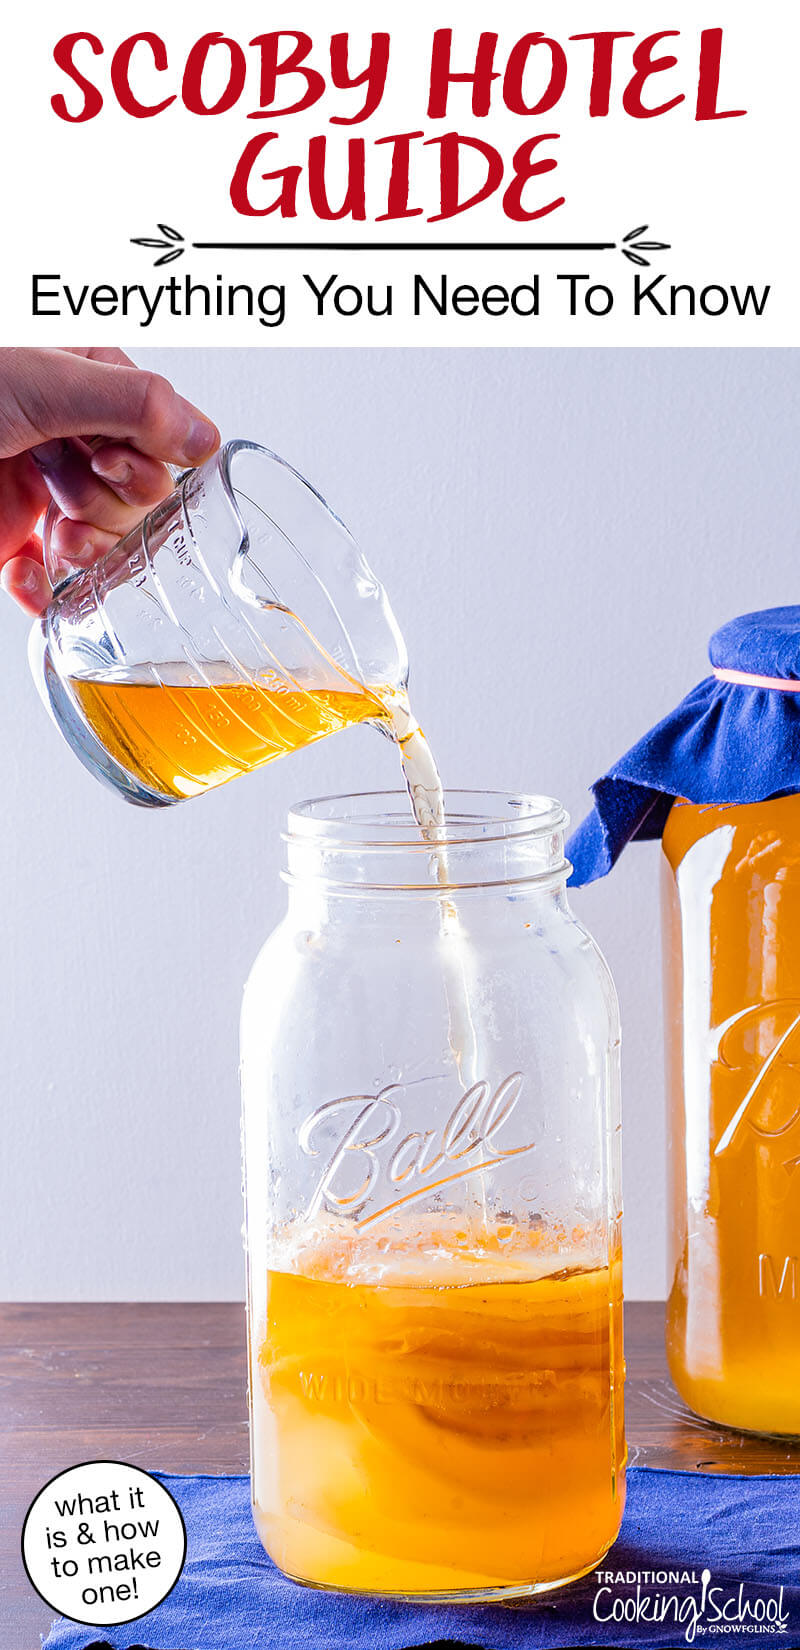 pouring finished Kombucha over SCOBYS suspended in a 1/2 gallon jar. Text overlay says: "SCOBY Hotel Guide: Everything You Need To Know (what it is & how to make one!)"